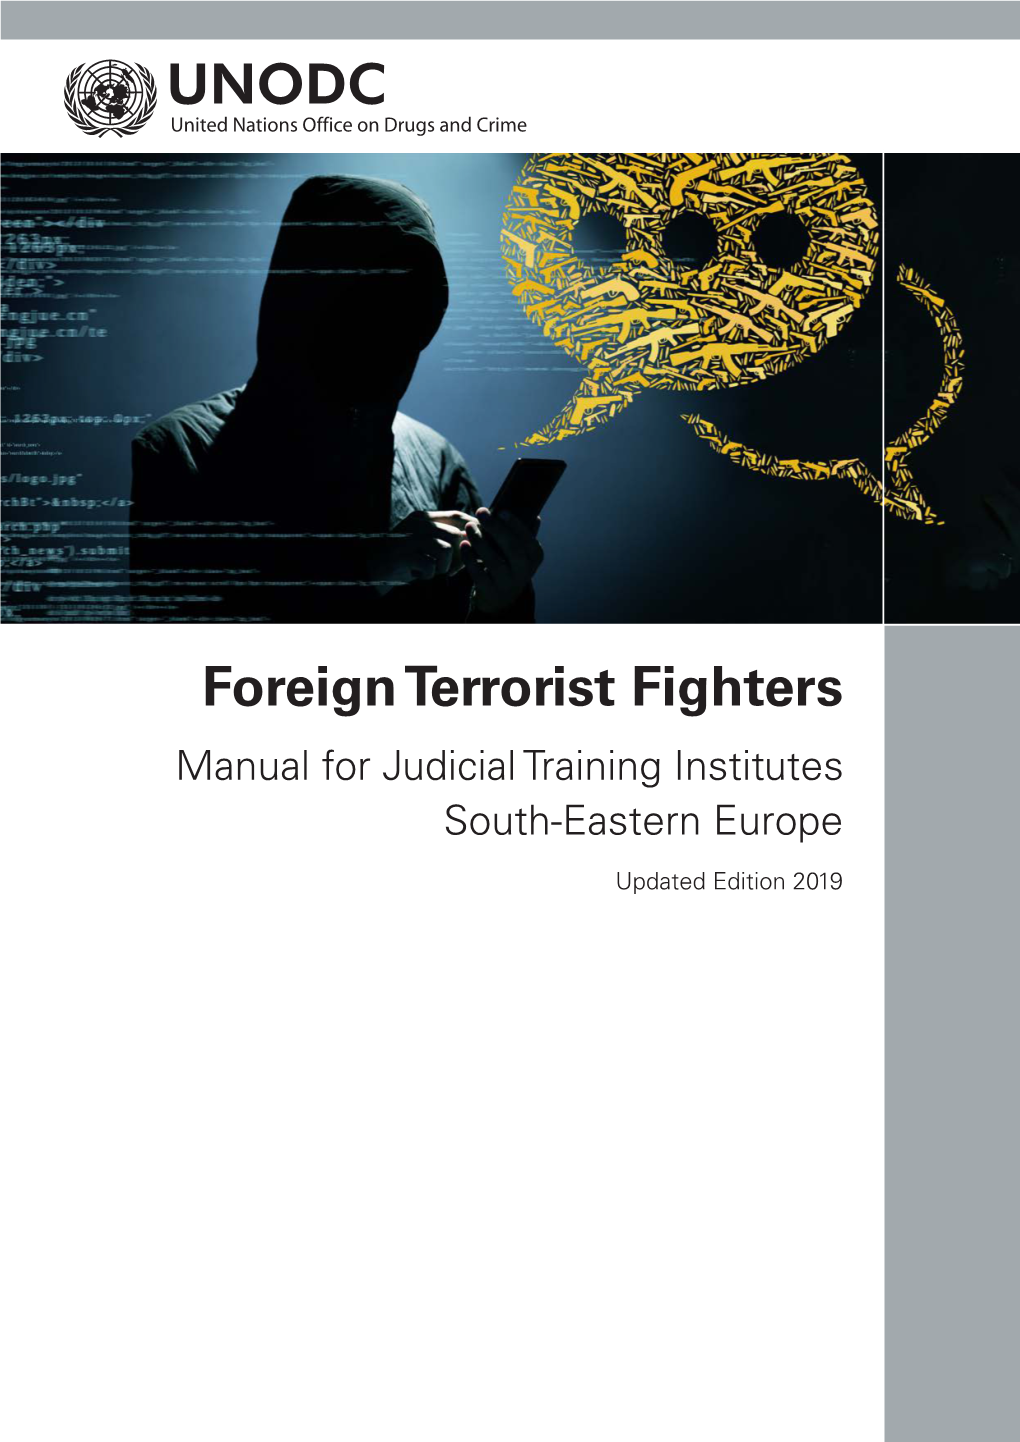 Foreign Terrorist Fighters. Manual for Judicial Training Institutes. South